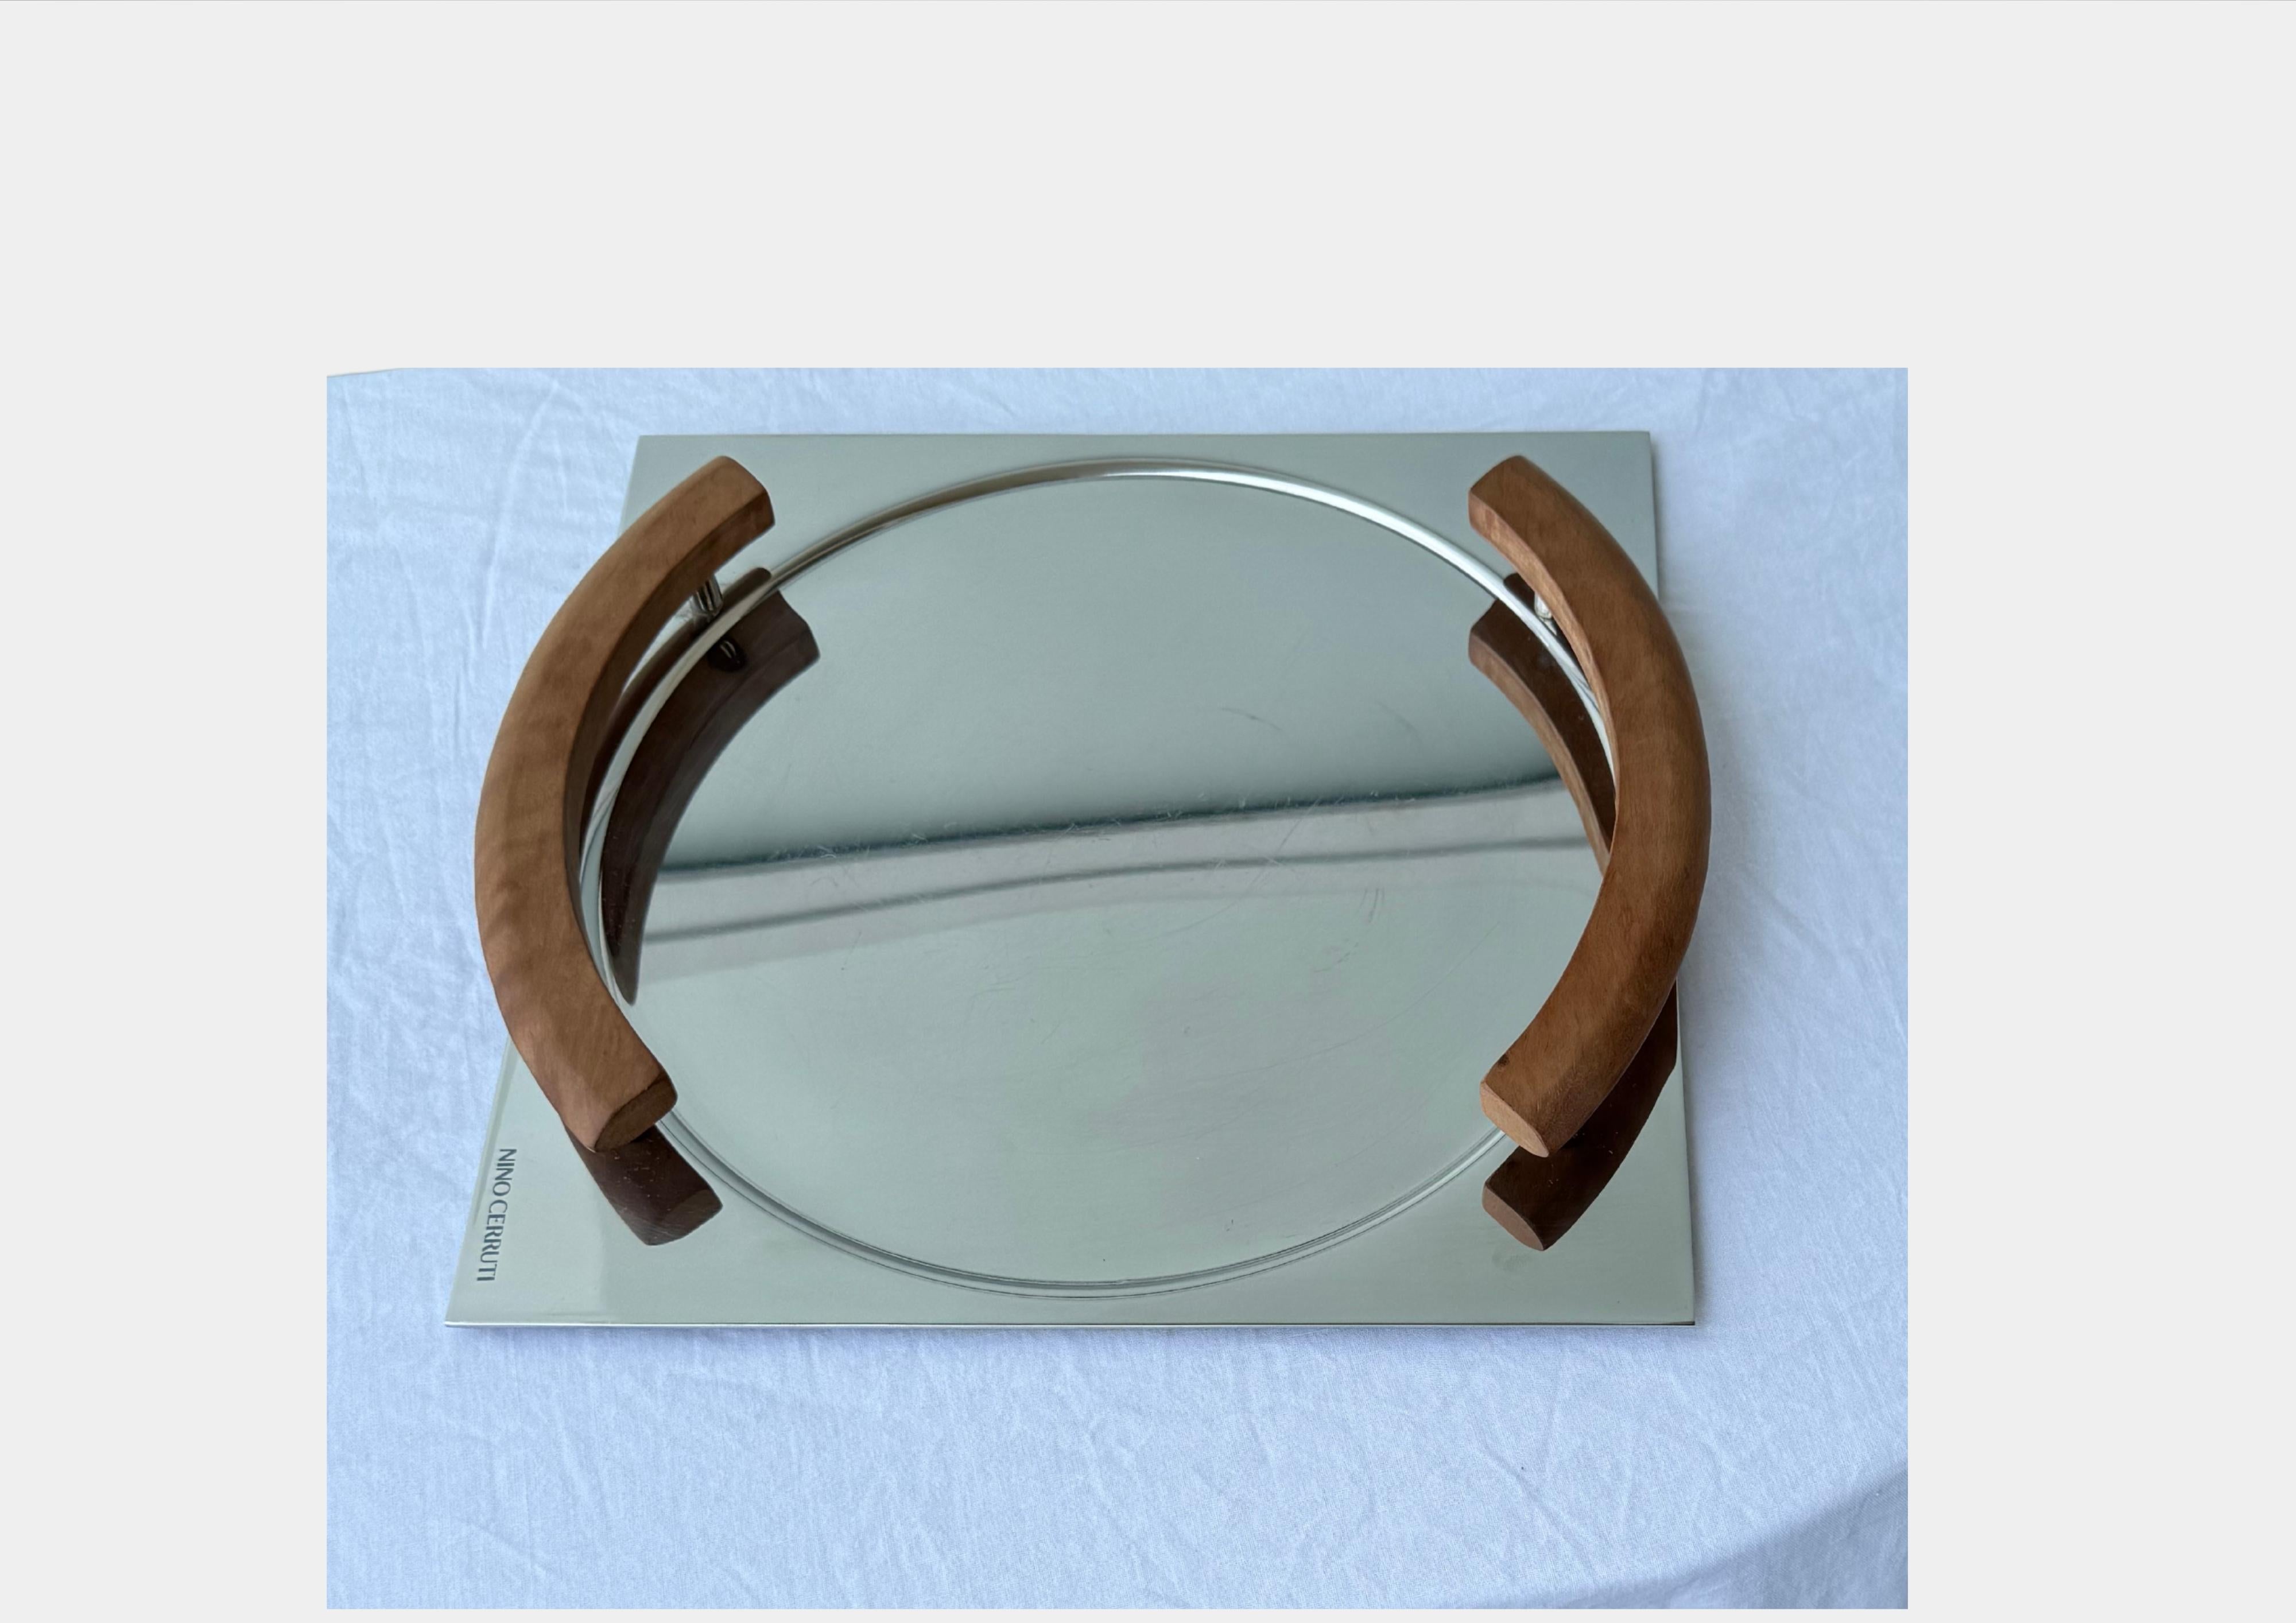 Vintage Nino Cerruti Stainless Steel & Wood Platter Tray In Good Condition For Sale In Torquay, GB